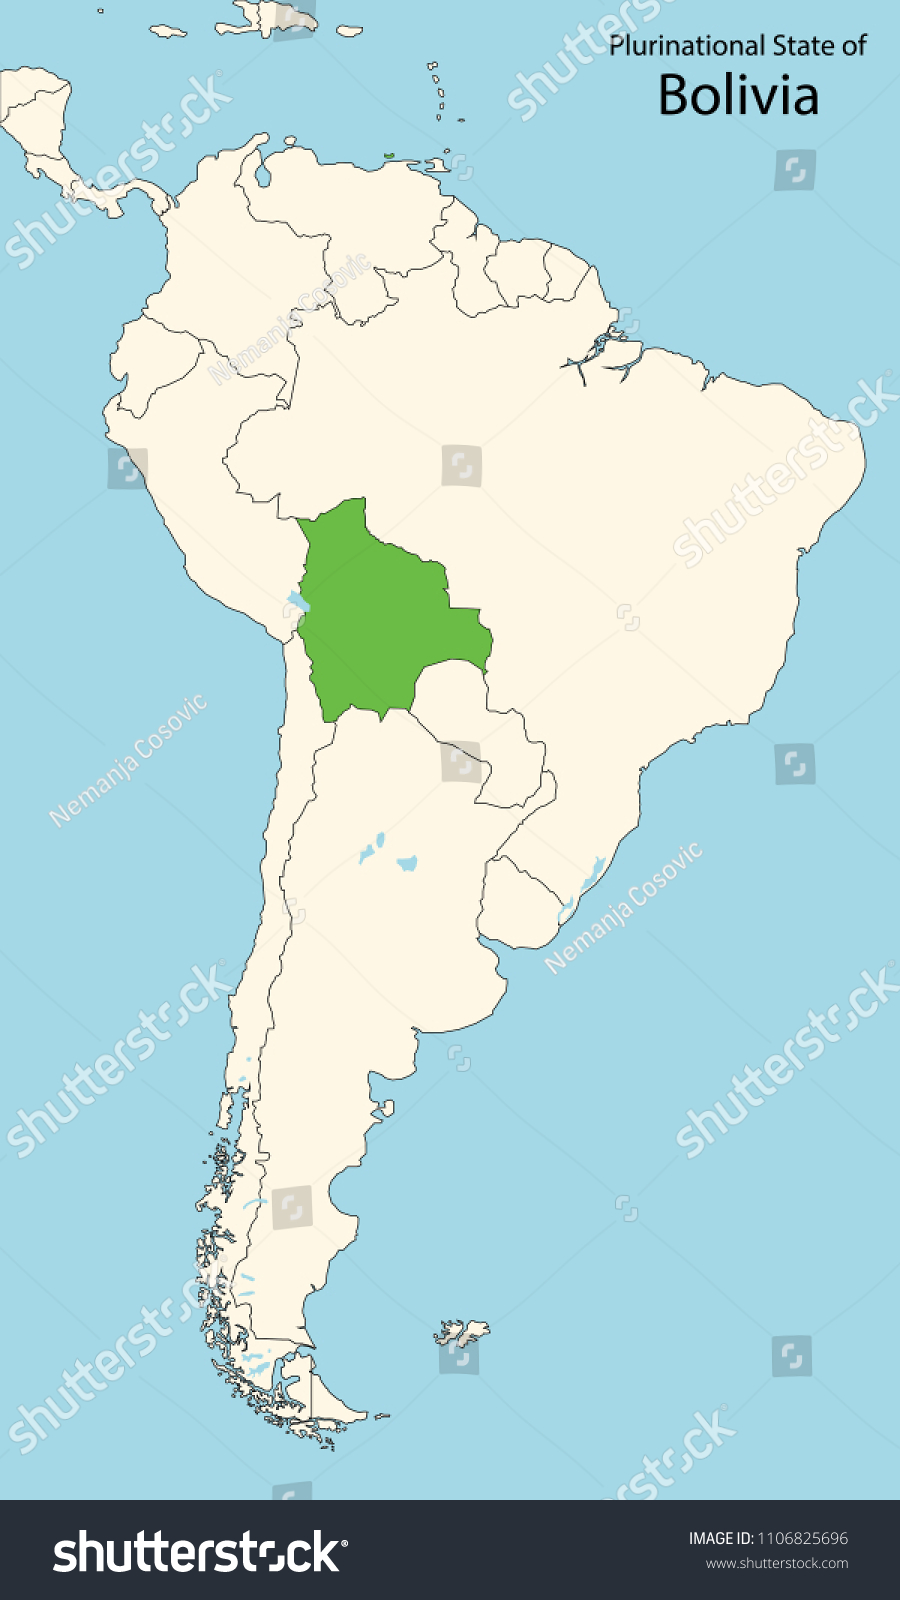 South America Map Bolivia Stock Vector (Royalty Free) 1106825696 ...